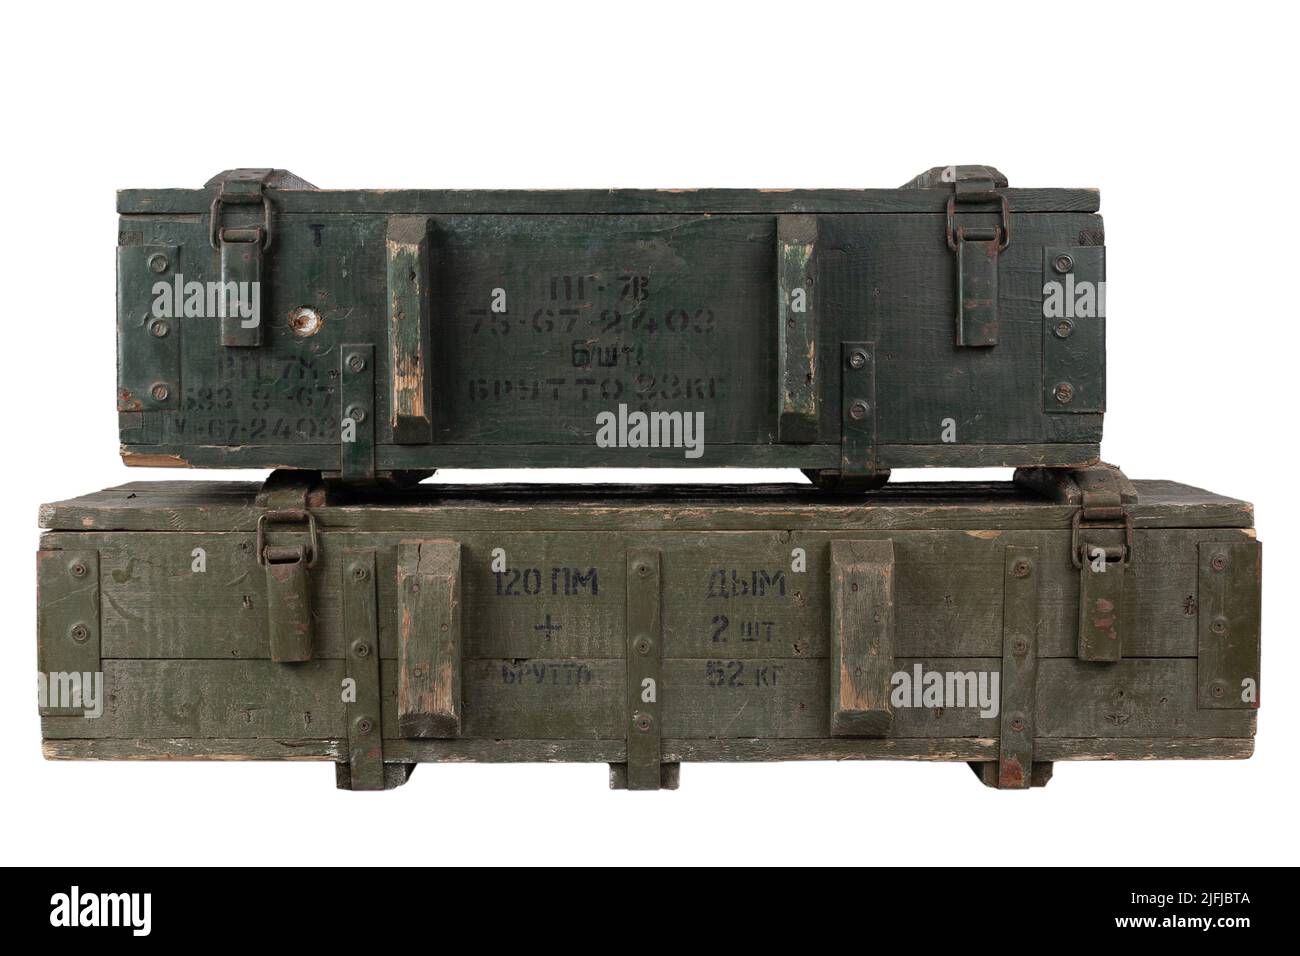 Army ammunition stack of green crates. Text in russian - type of ammunition, projectile caliber, projectile type, number of pieces and weight. Isolate Stock Photo